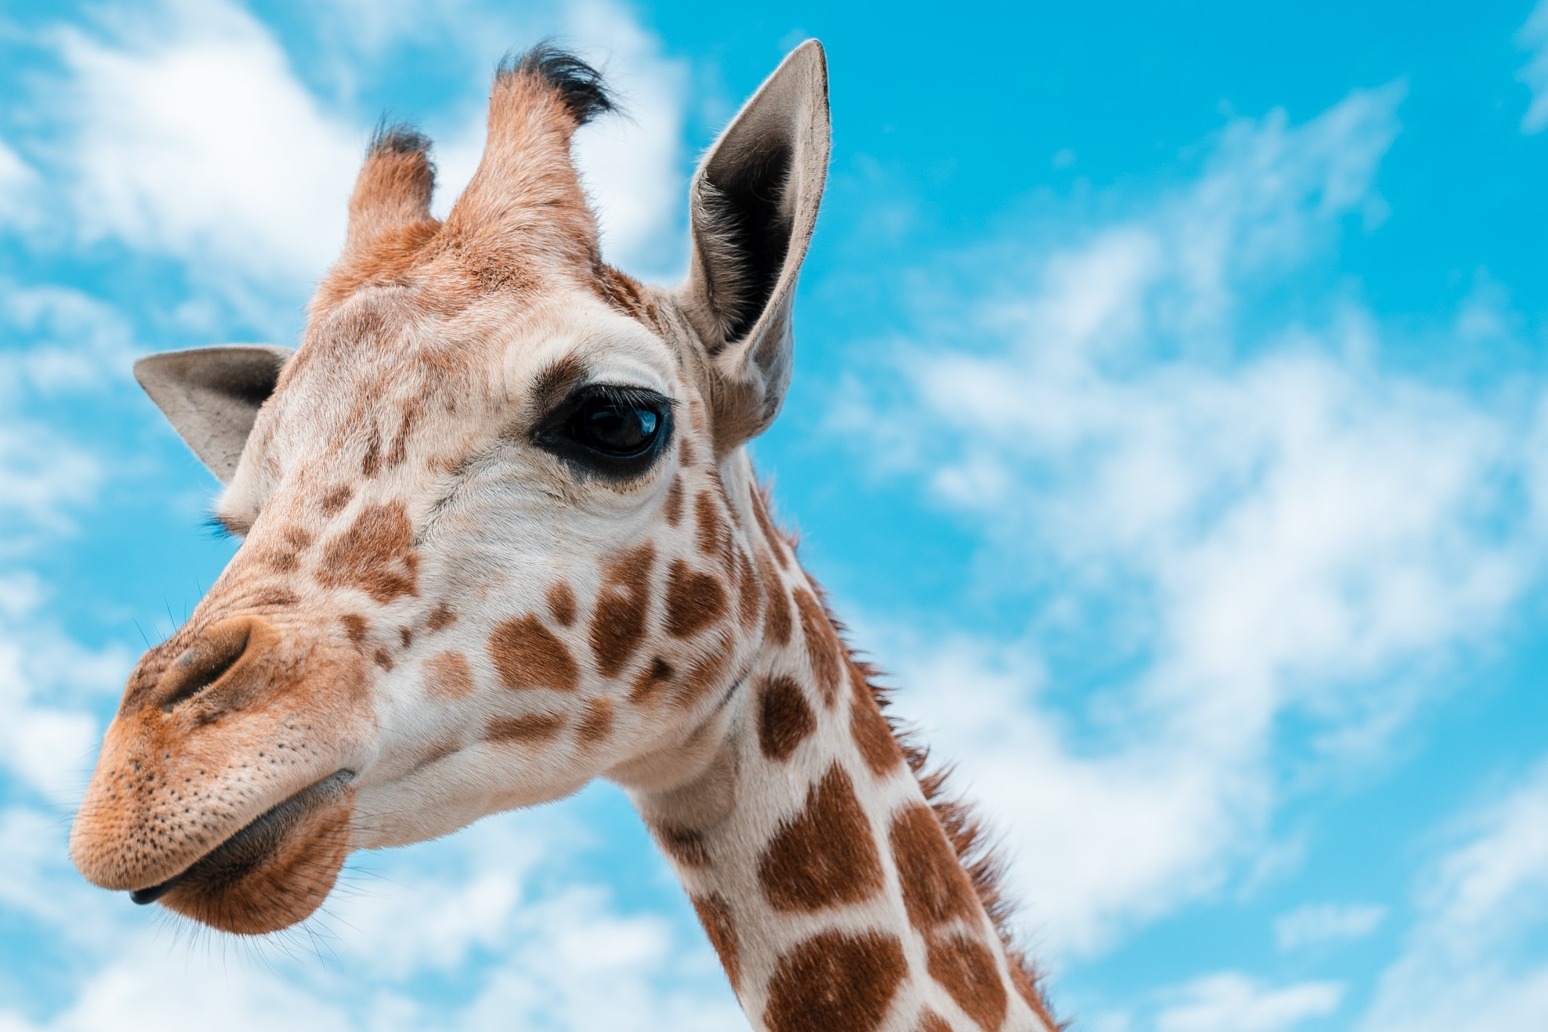 Four charged over harassment of giraffe during break-in at a zoo 